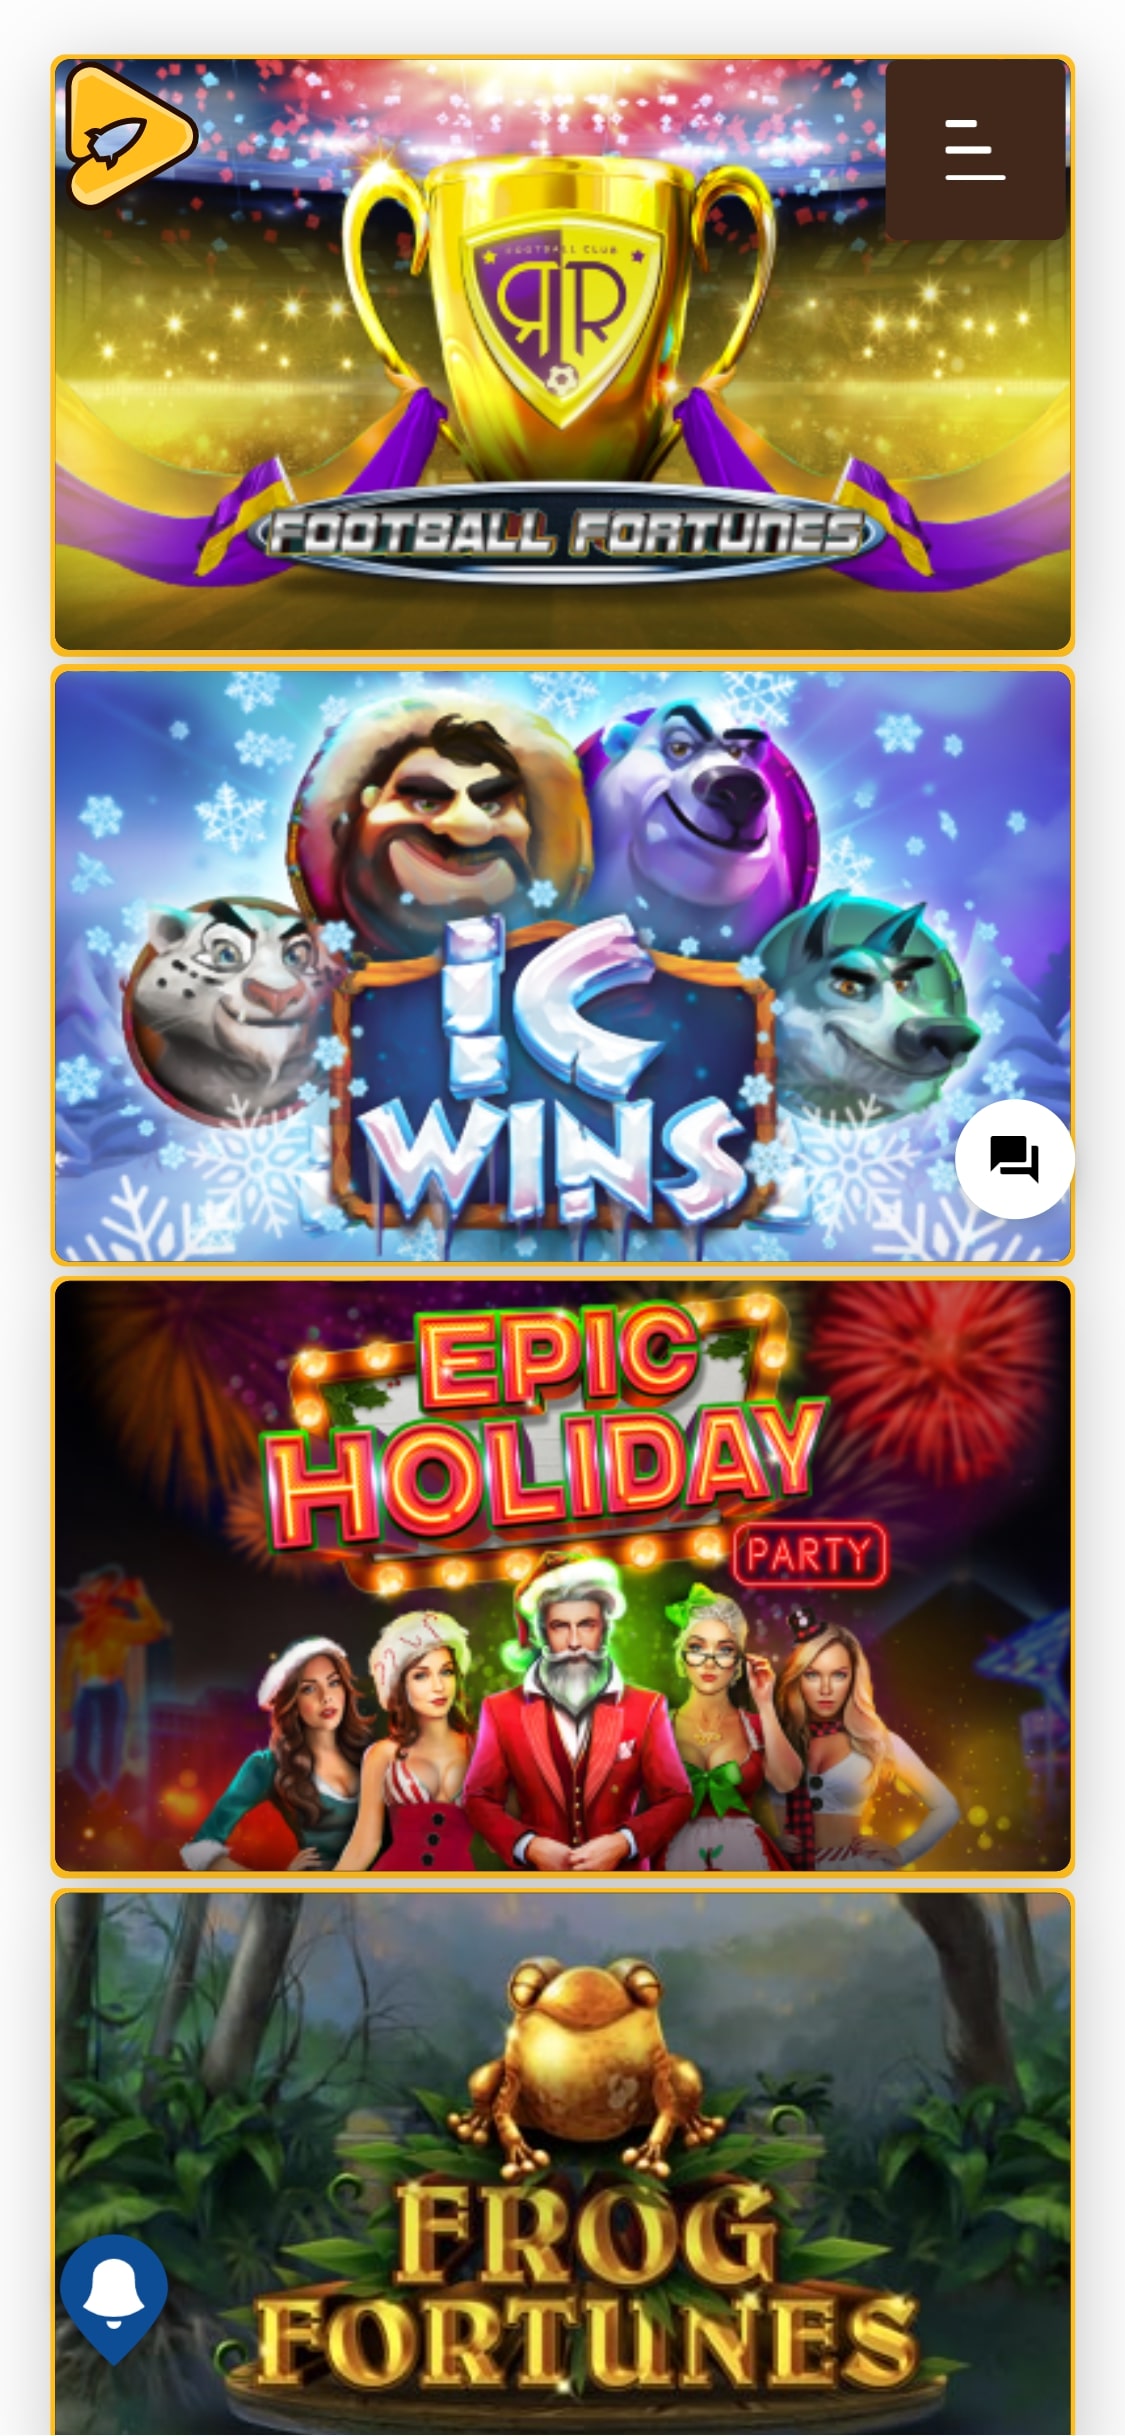 Aussieplay Casino Mobile Games Review